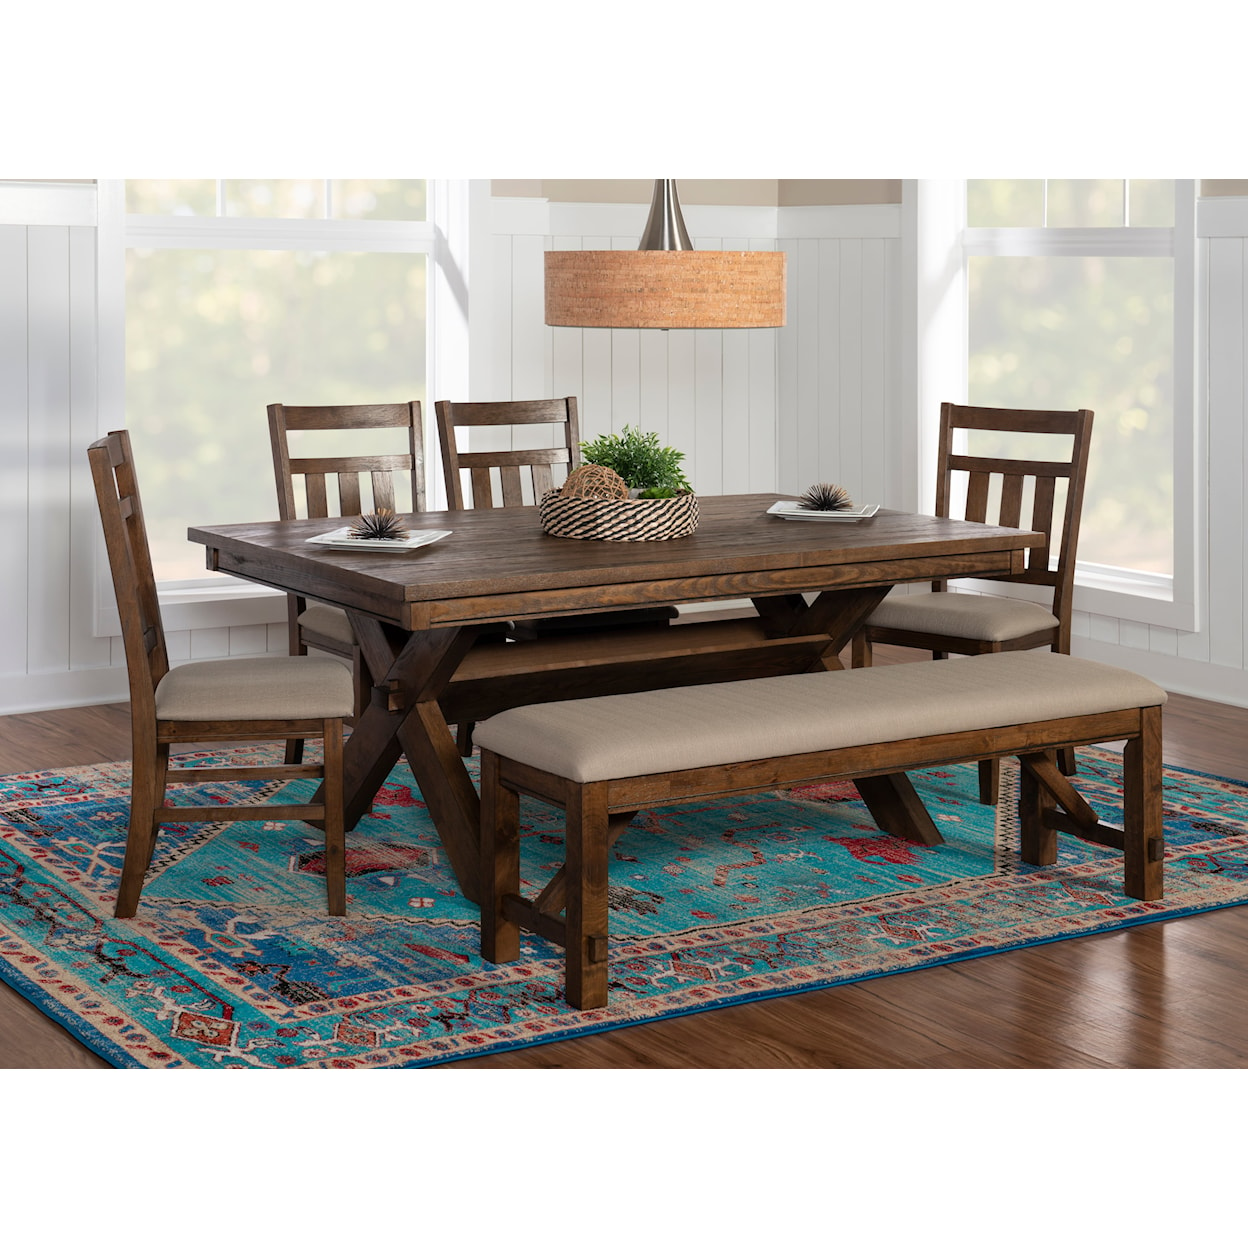 Powell Turino 6 Piece Table, Bench & Chair Set